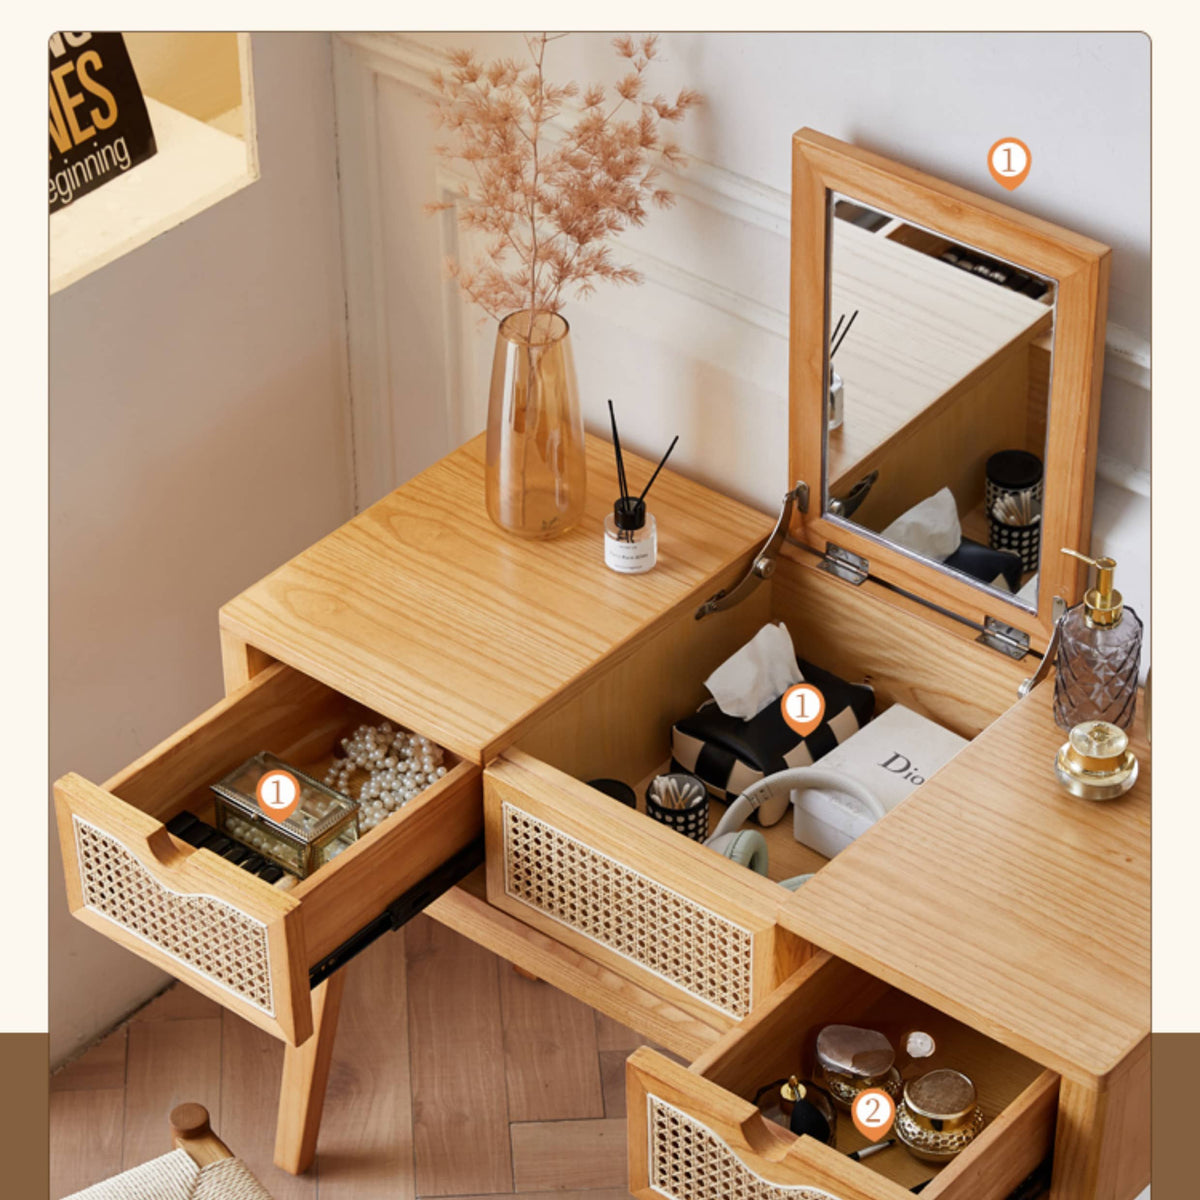 Elegant Natural Wood Makeup Table with Rattan and Ash Wood Accents, Glass Top tzm-525